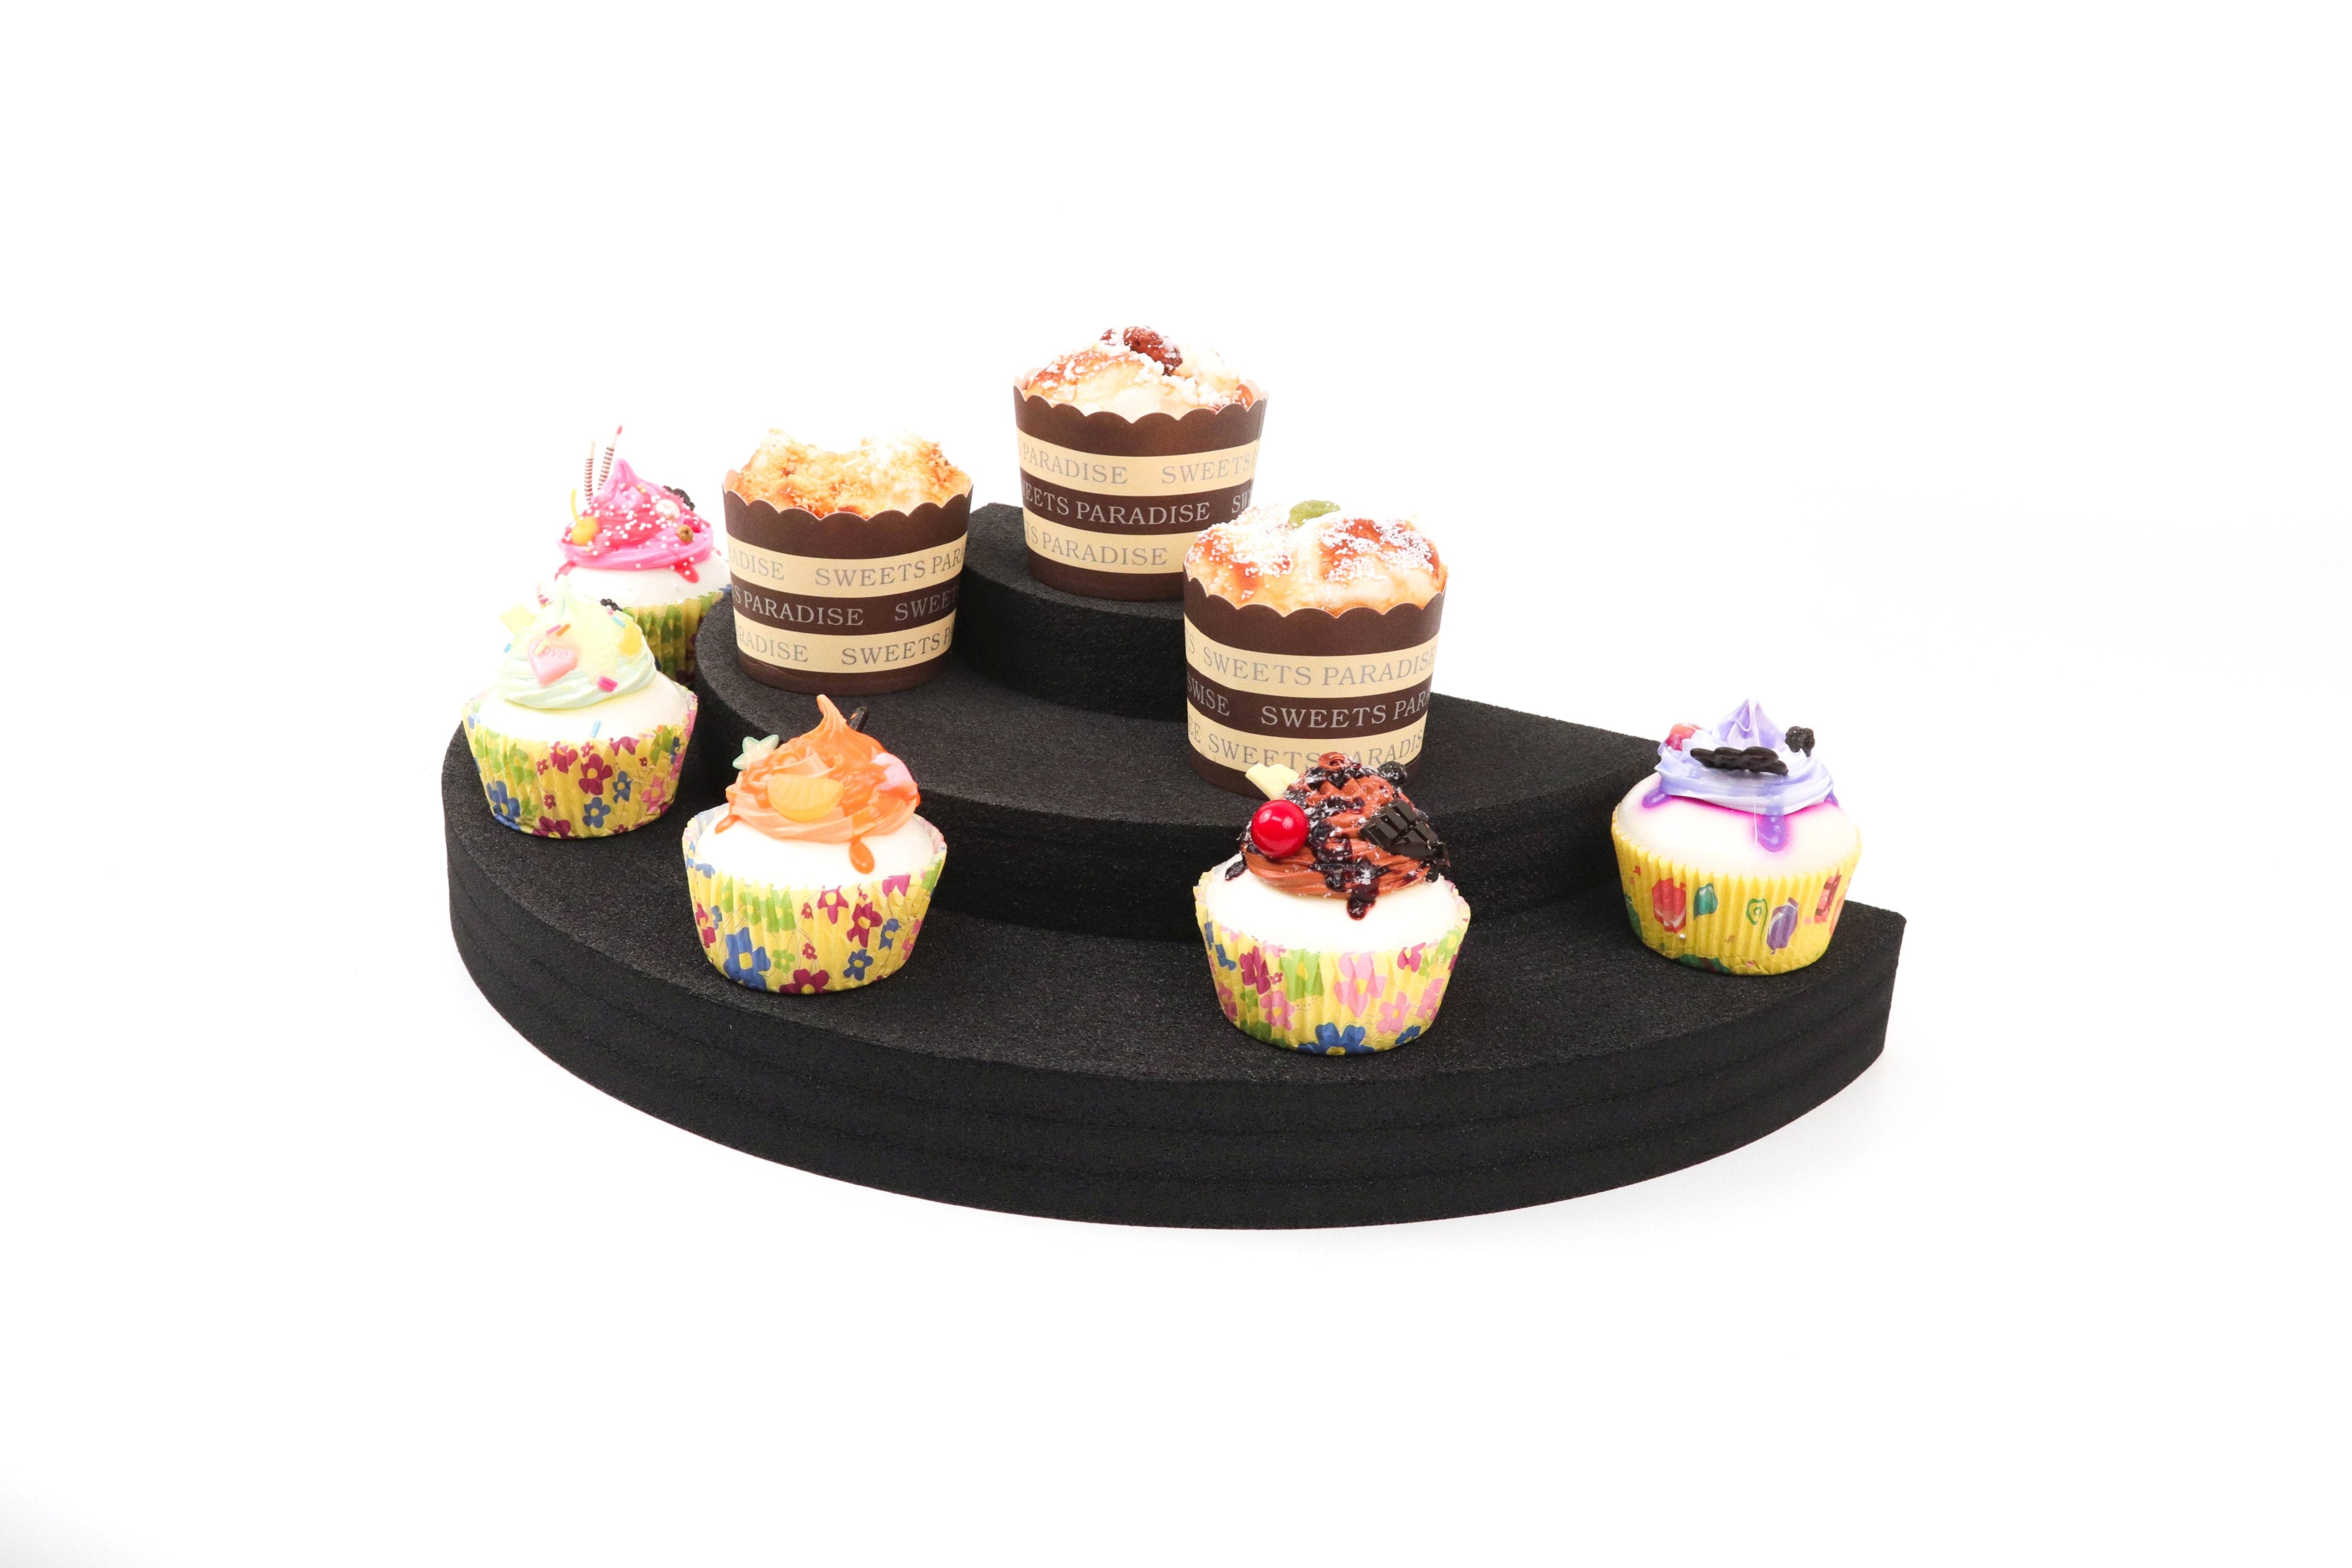 Dessert Cupcake Display Stand 3 Tier Half Circle Kitchen Dining Room Countertop Durable Black Foam Washable Waterproof 18 x 9 x 4 Inches